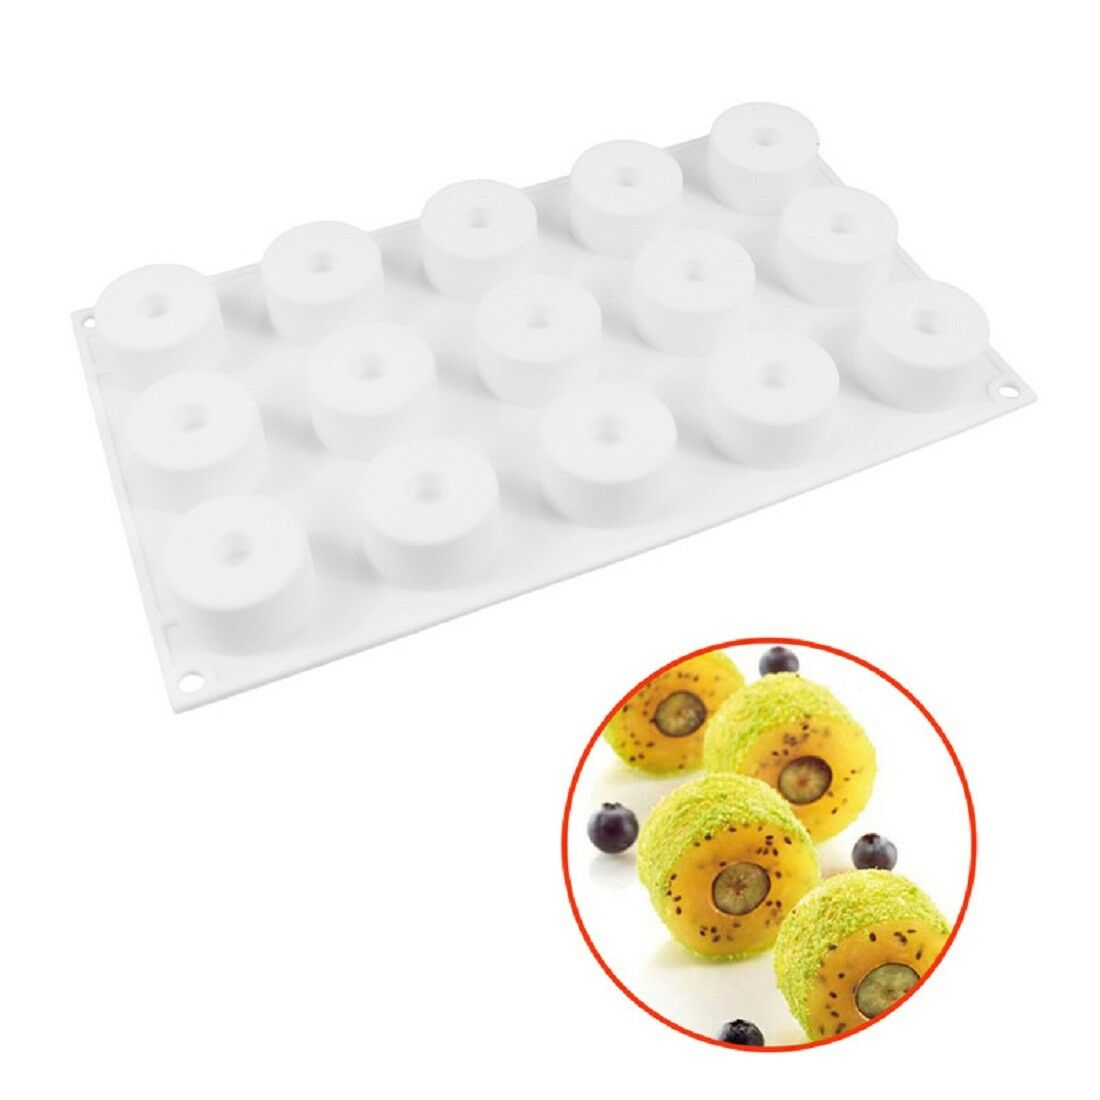 15 Holes Hollow Circle Baking Silicone Mould Cake Mold Decoration Tools